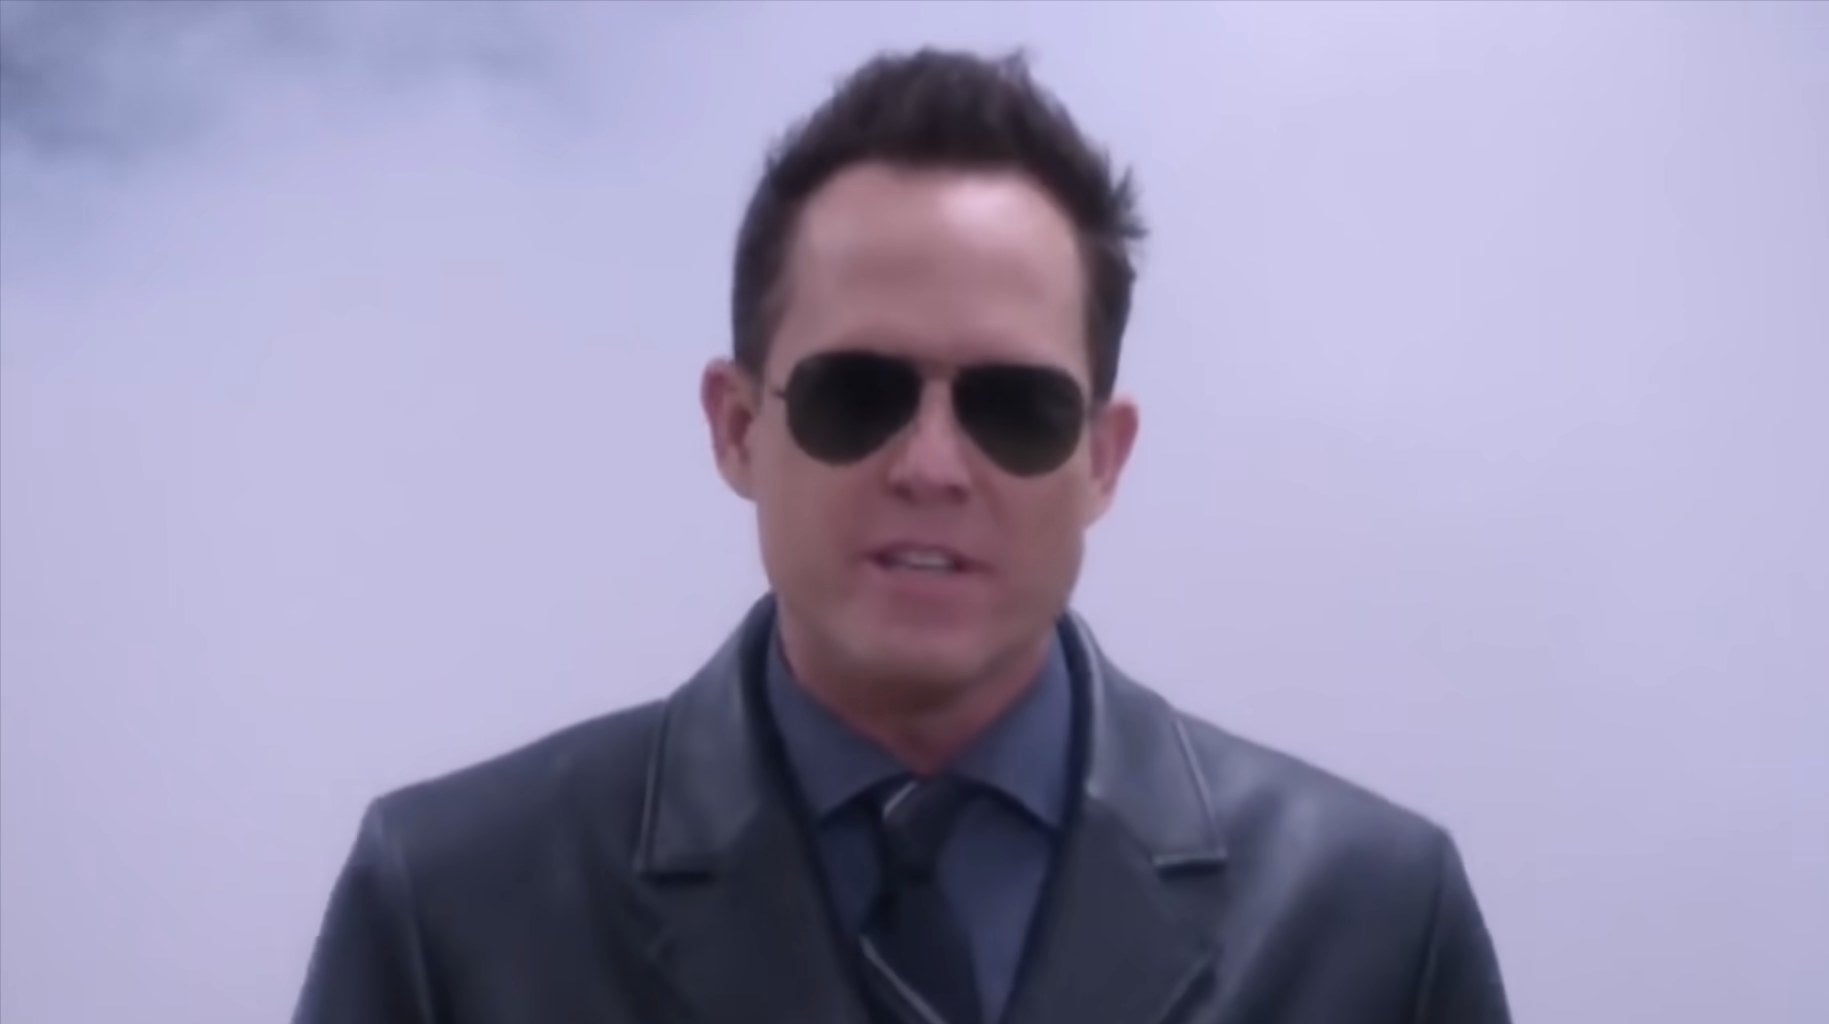 The Vulture wearing sunglasses in a cloud of tear gas in &quot;Brooklyn Nine-Nine&quot;